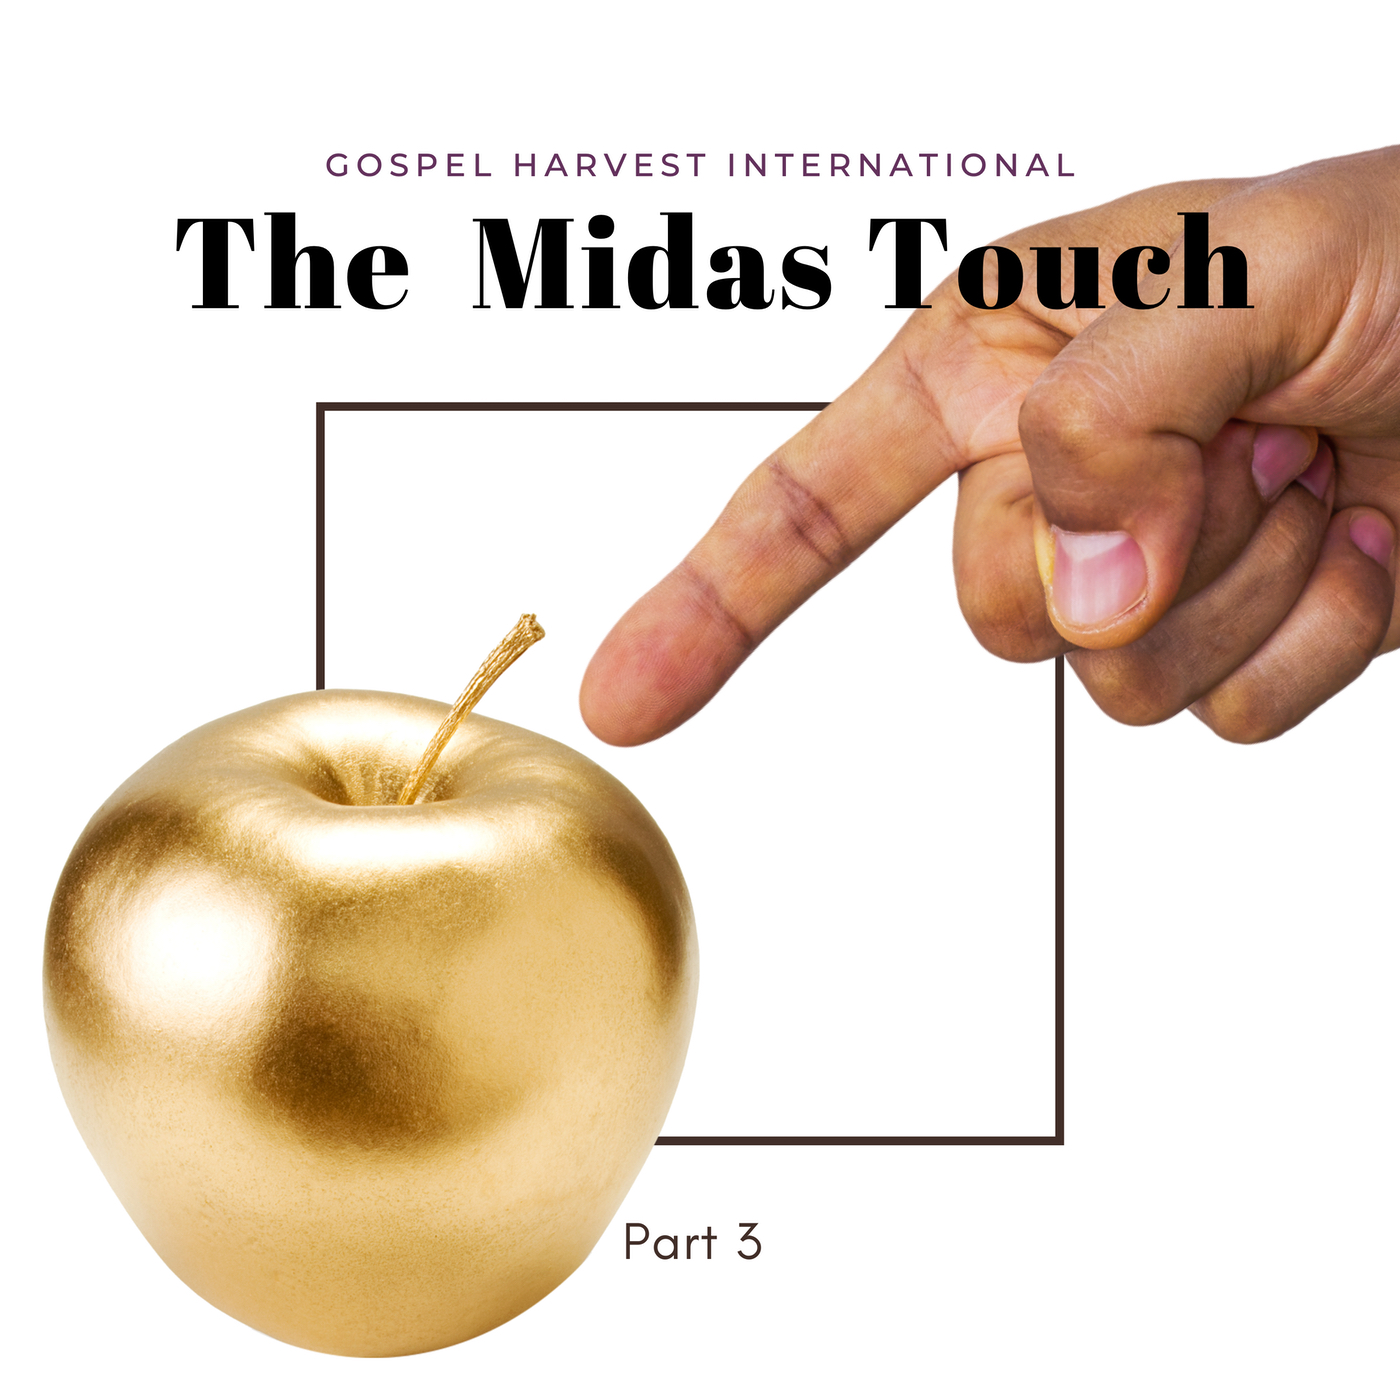 The Midas touch - Part 3 Image